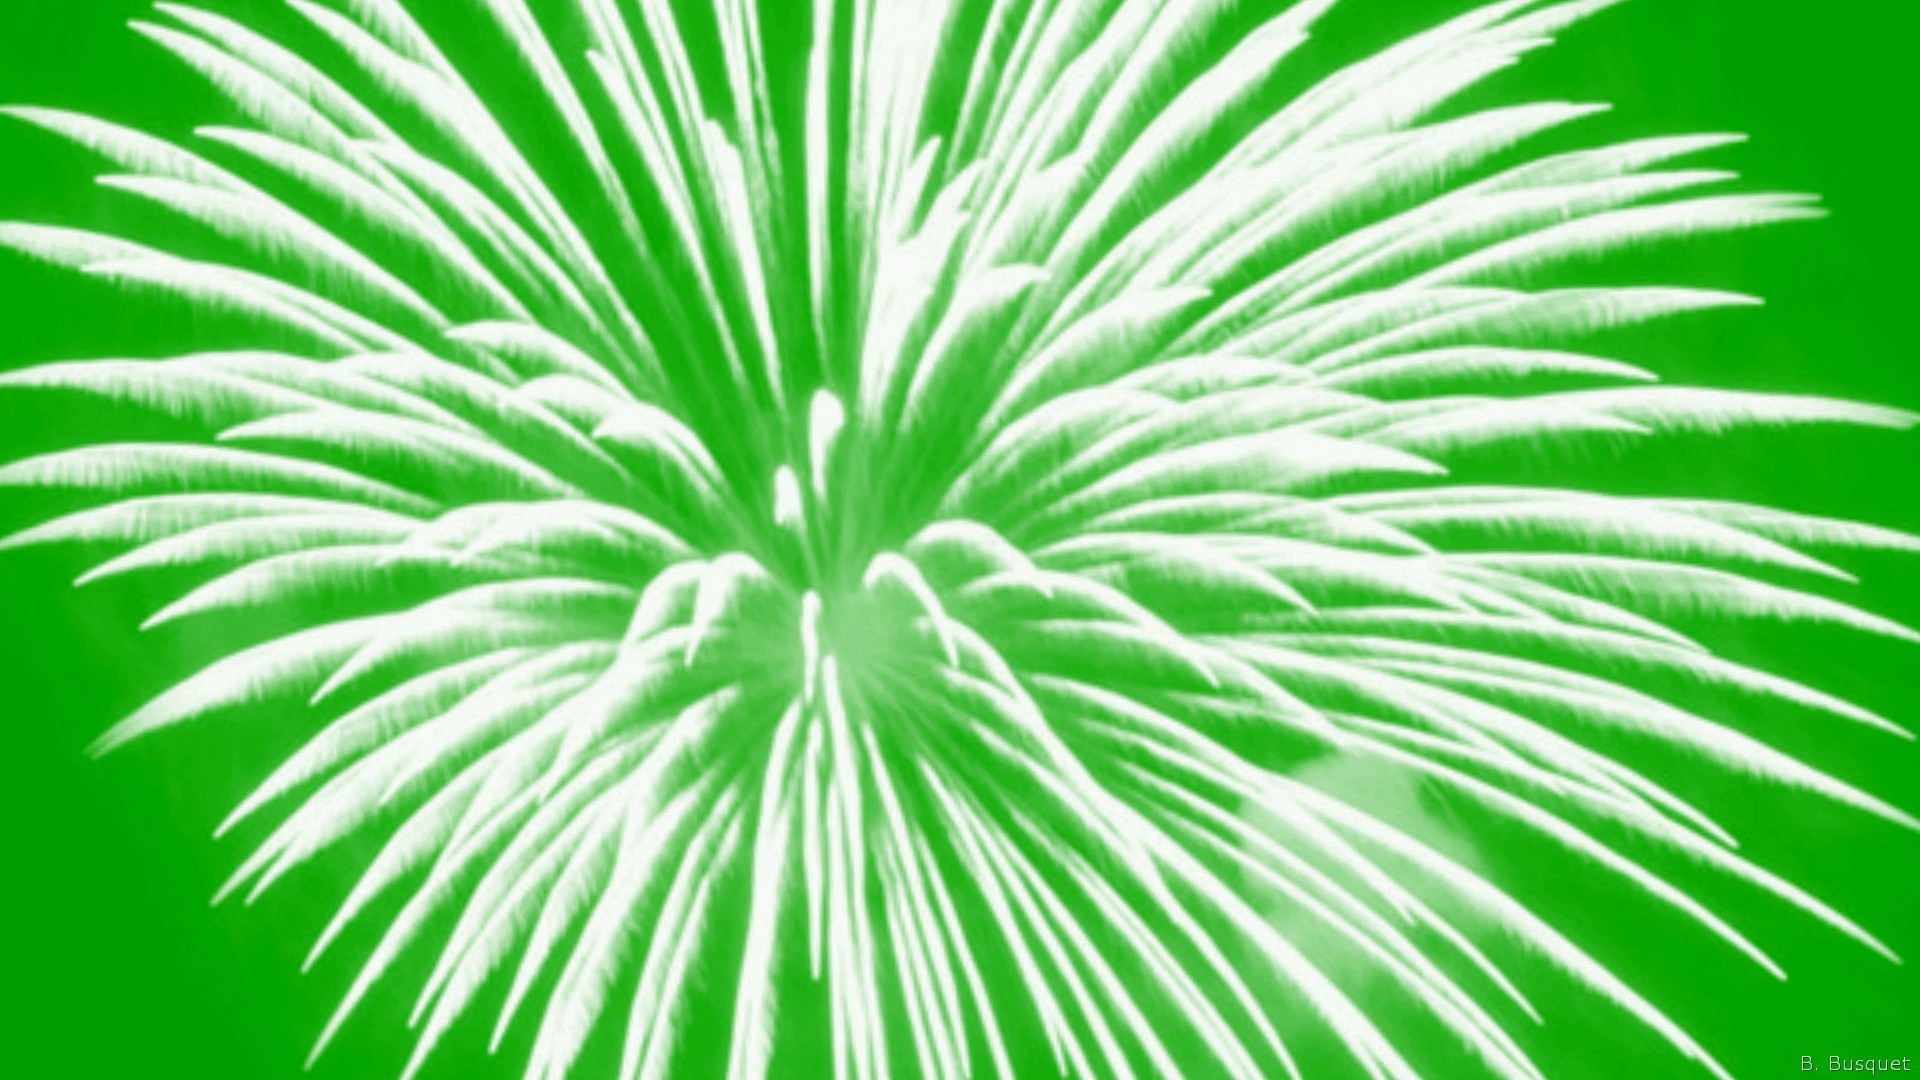 1920x1080 Green wallpaper with rectangles. White fireworks